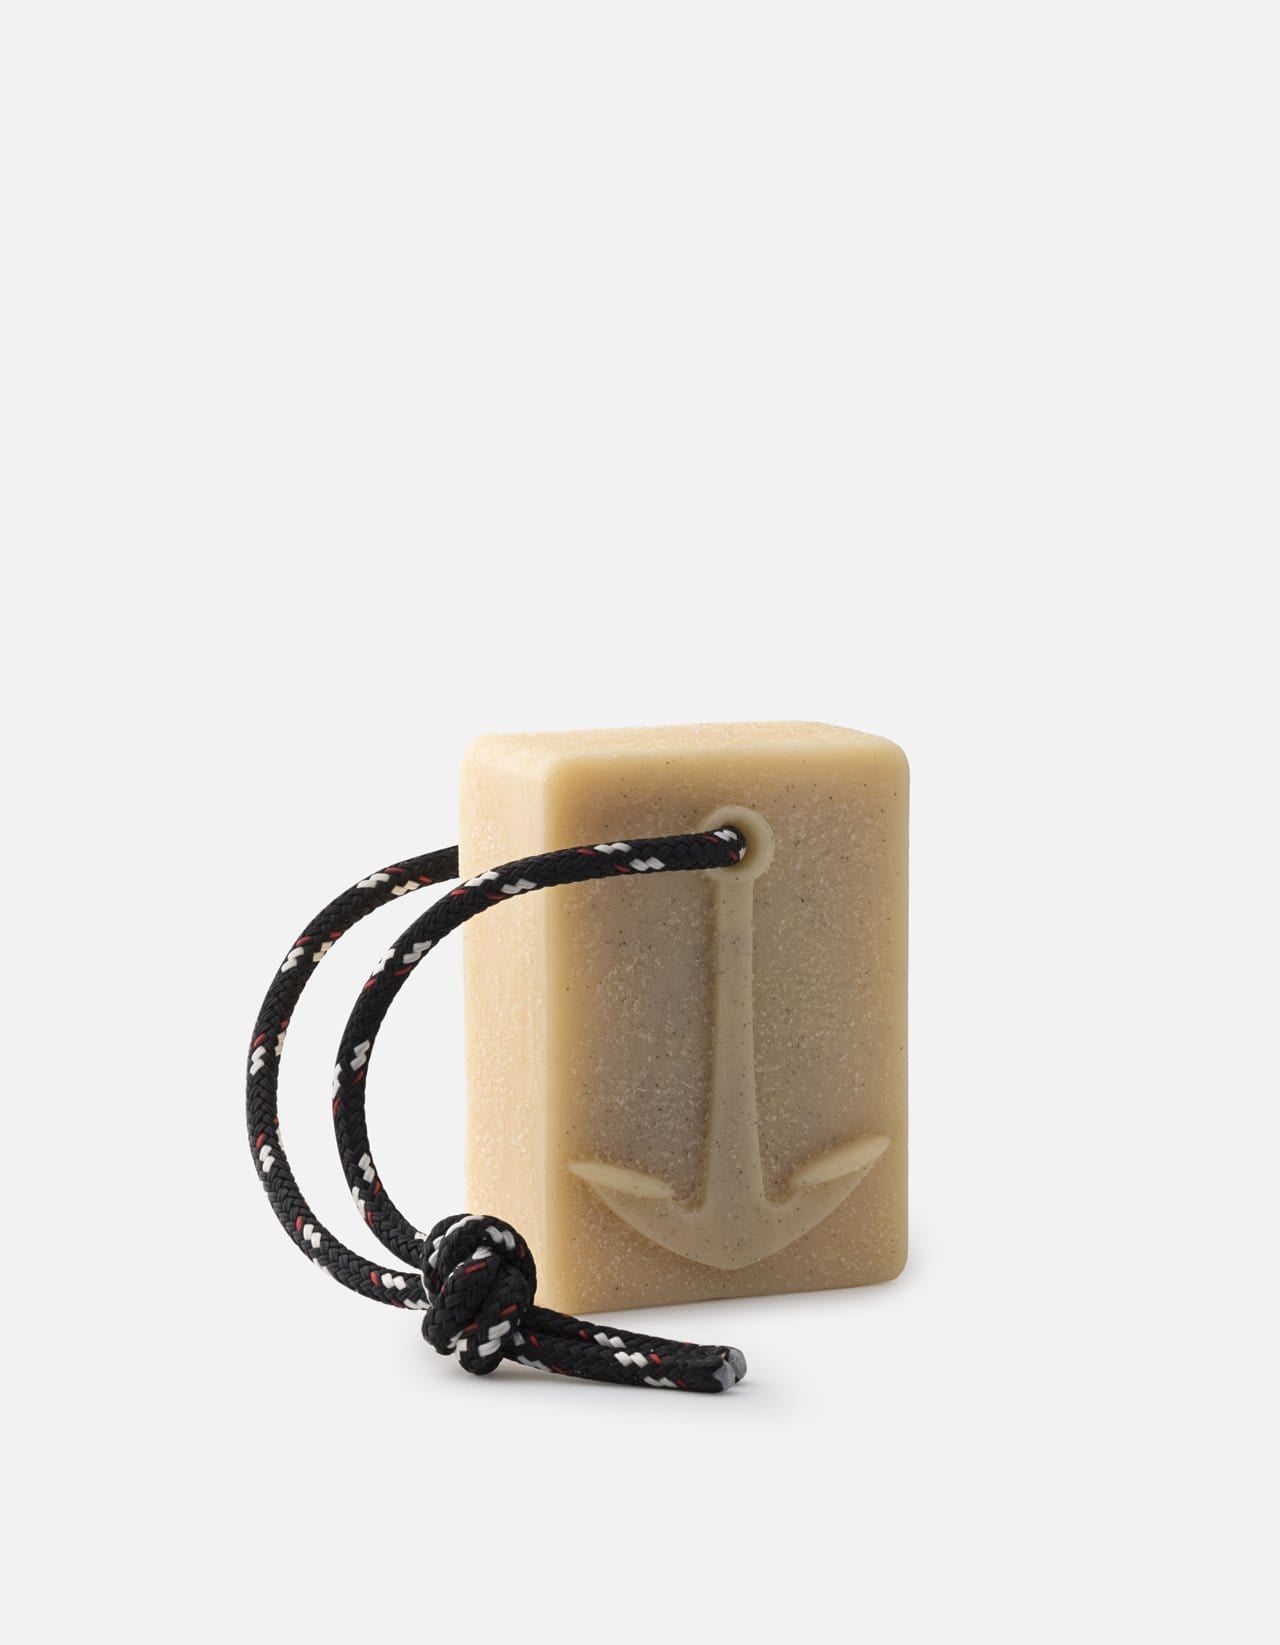 soap on a rope meaning